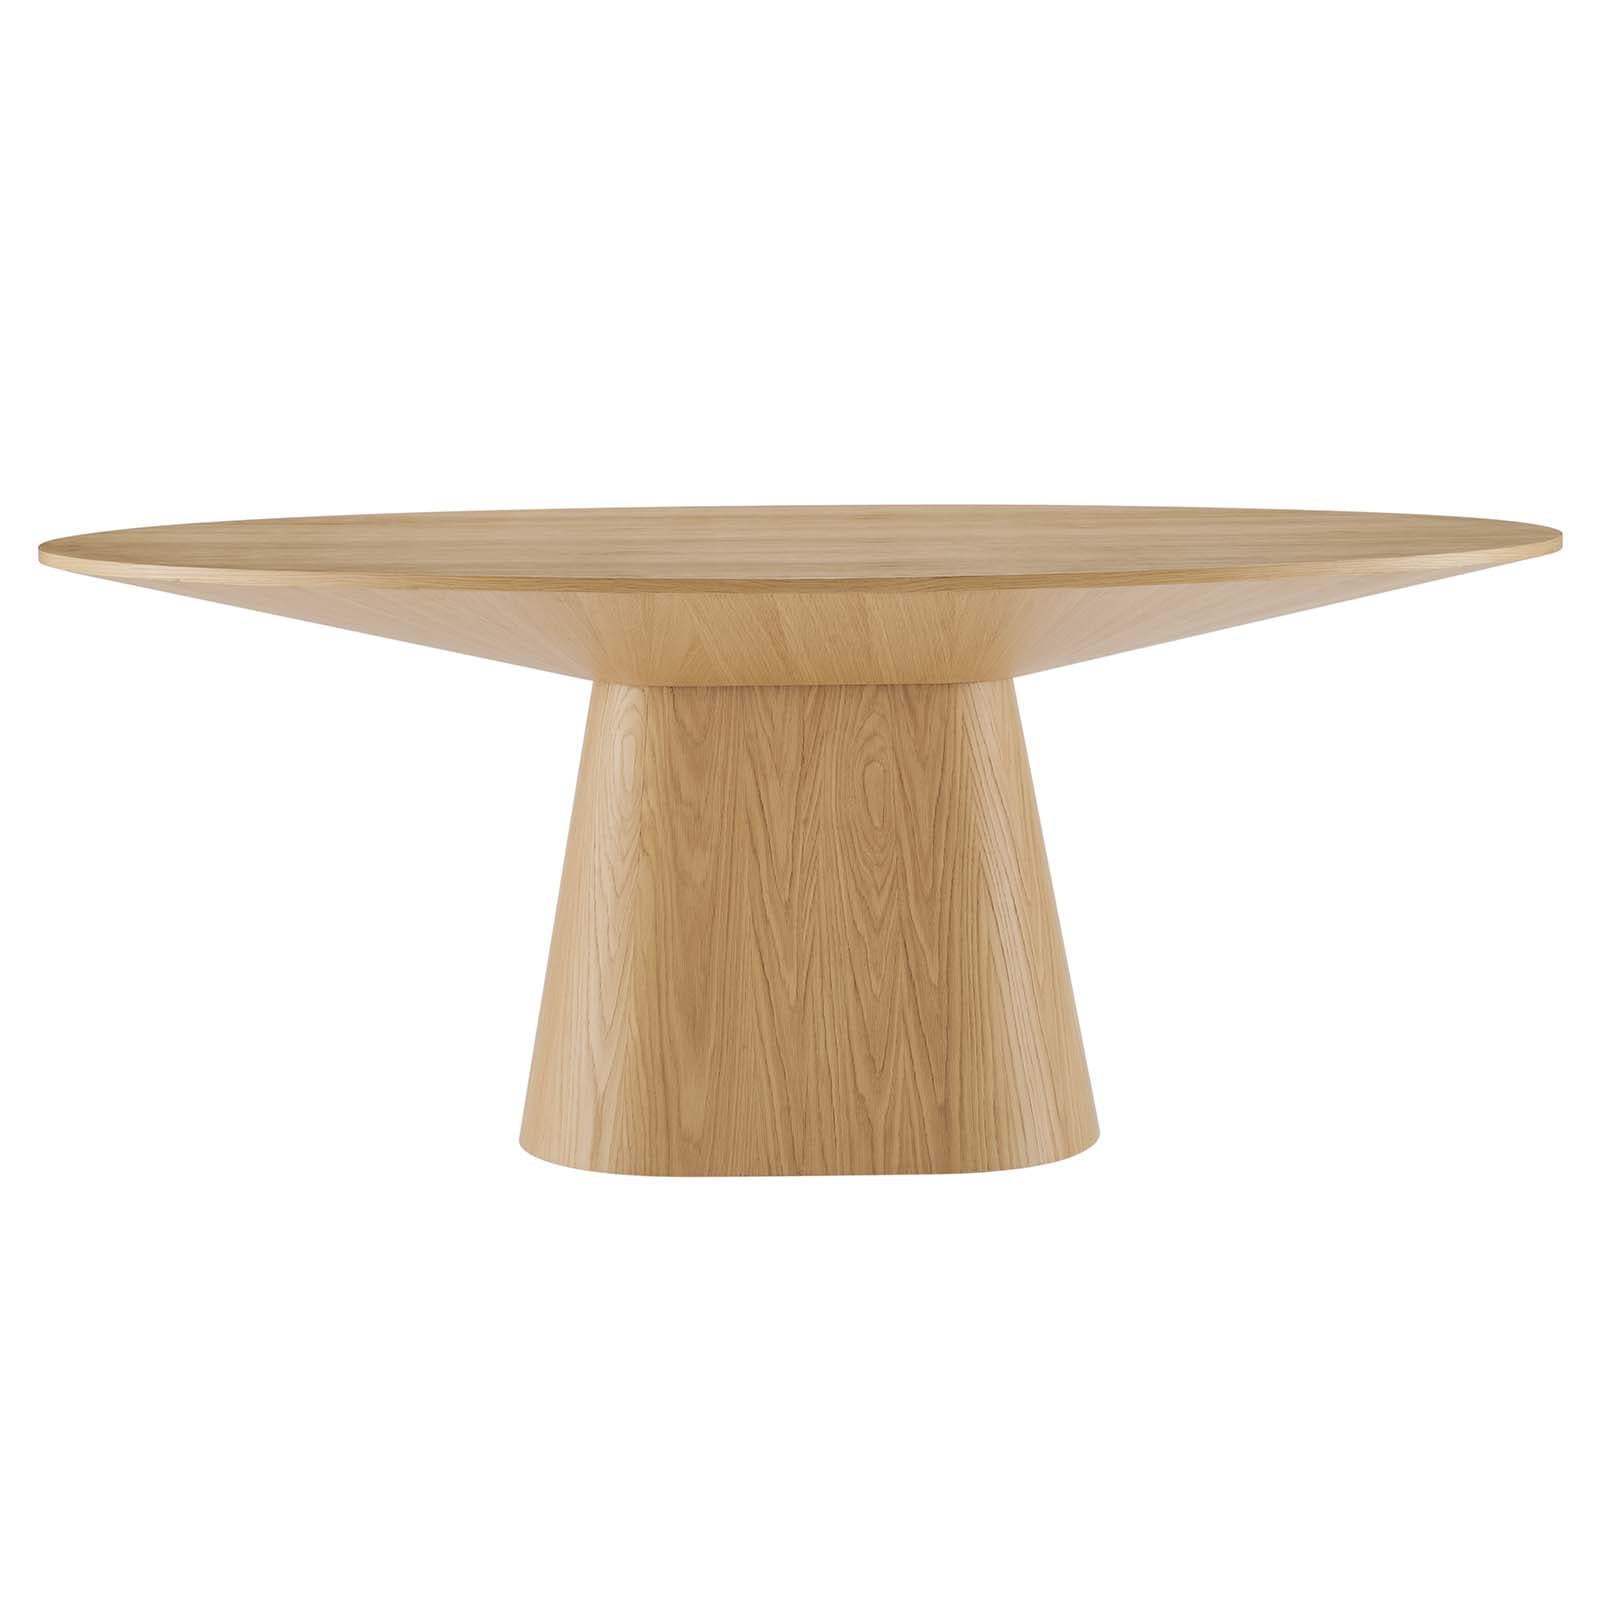 Provision 75" Oval Dining Table - East Shore Modern Home Furnishings